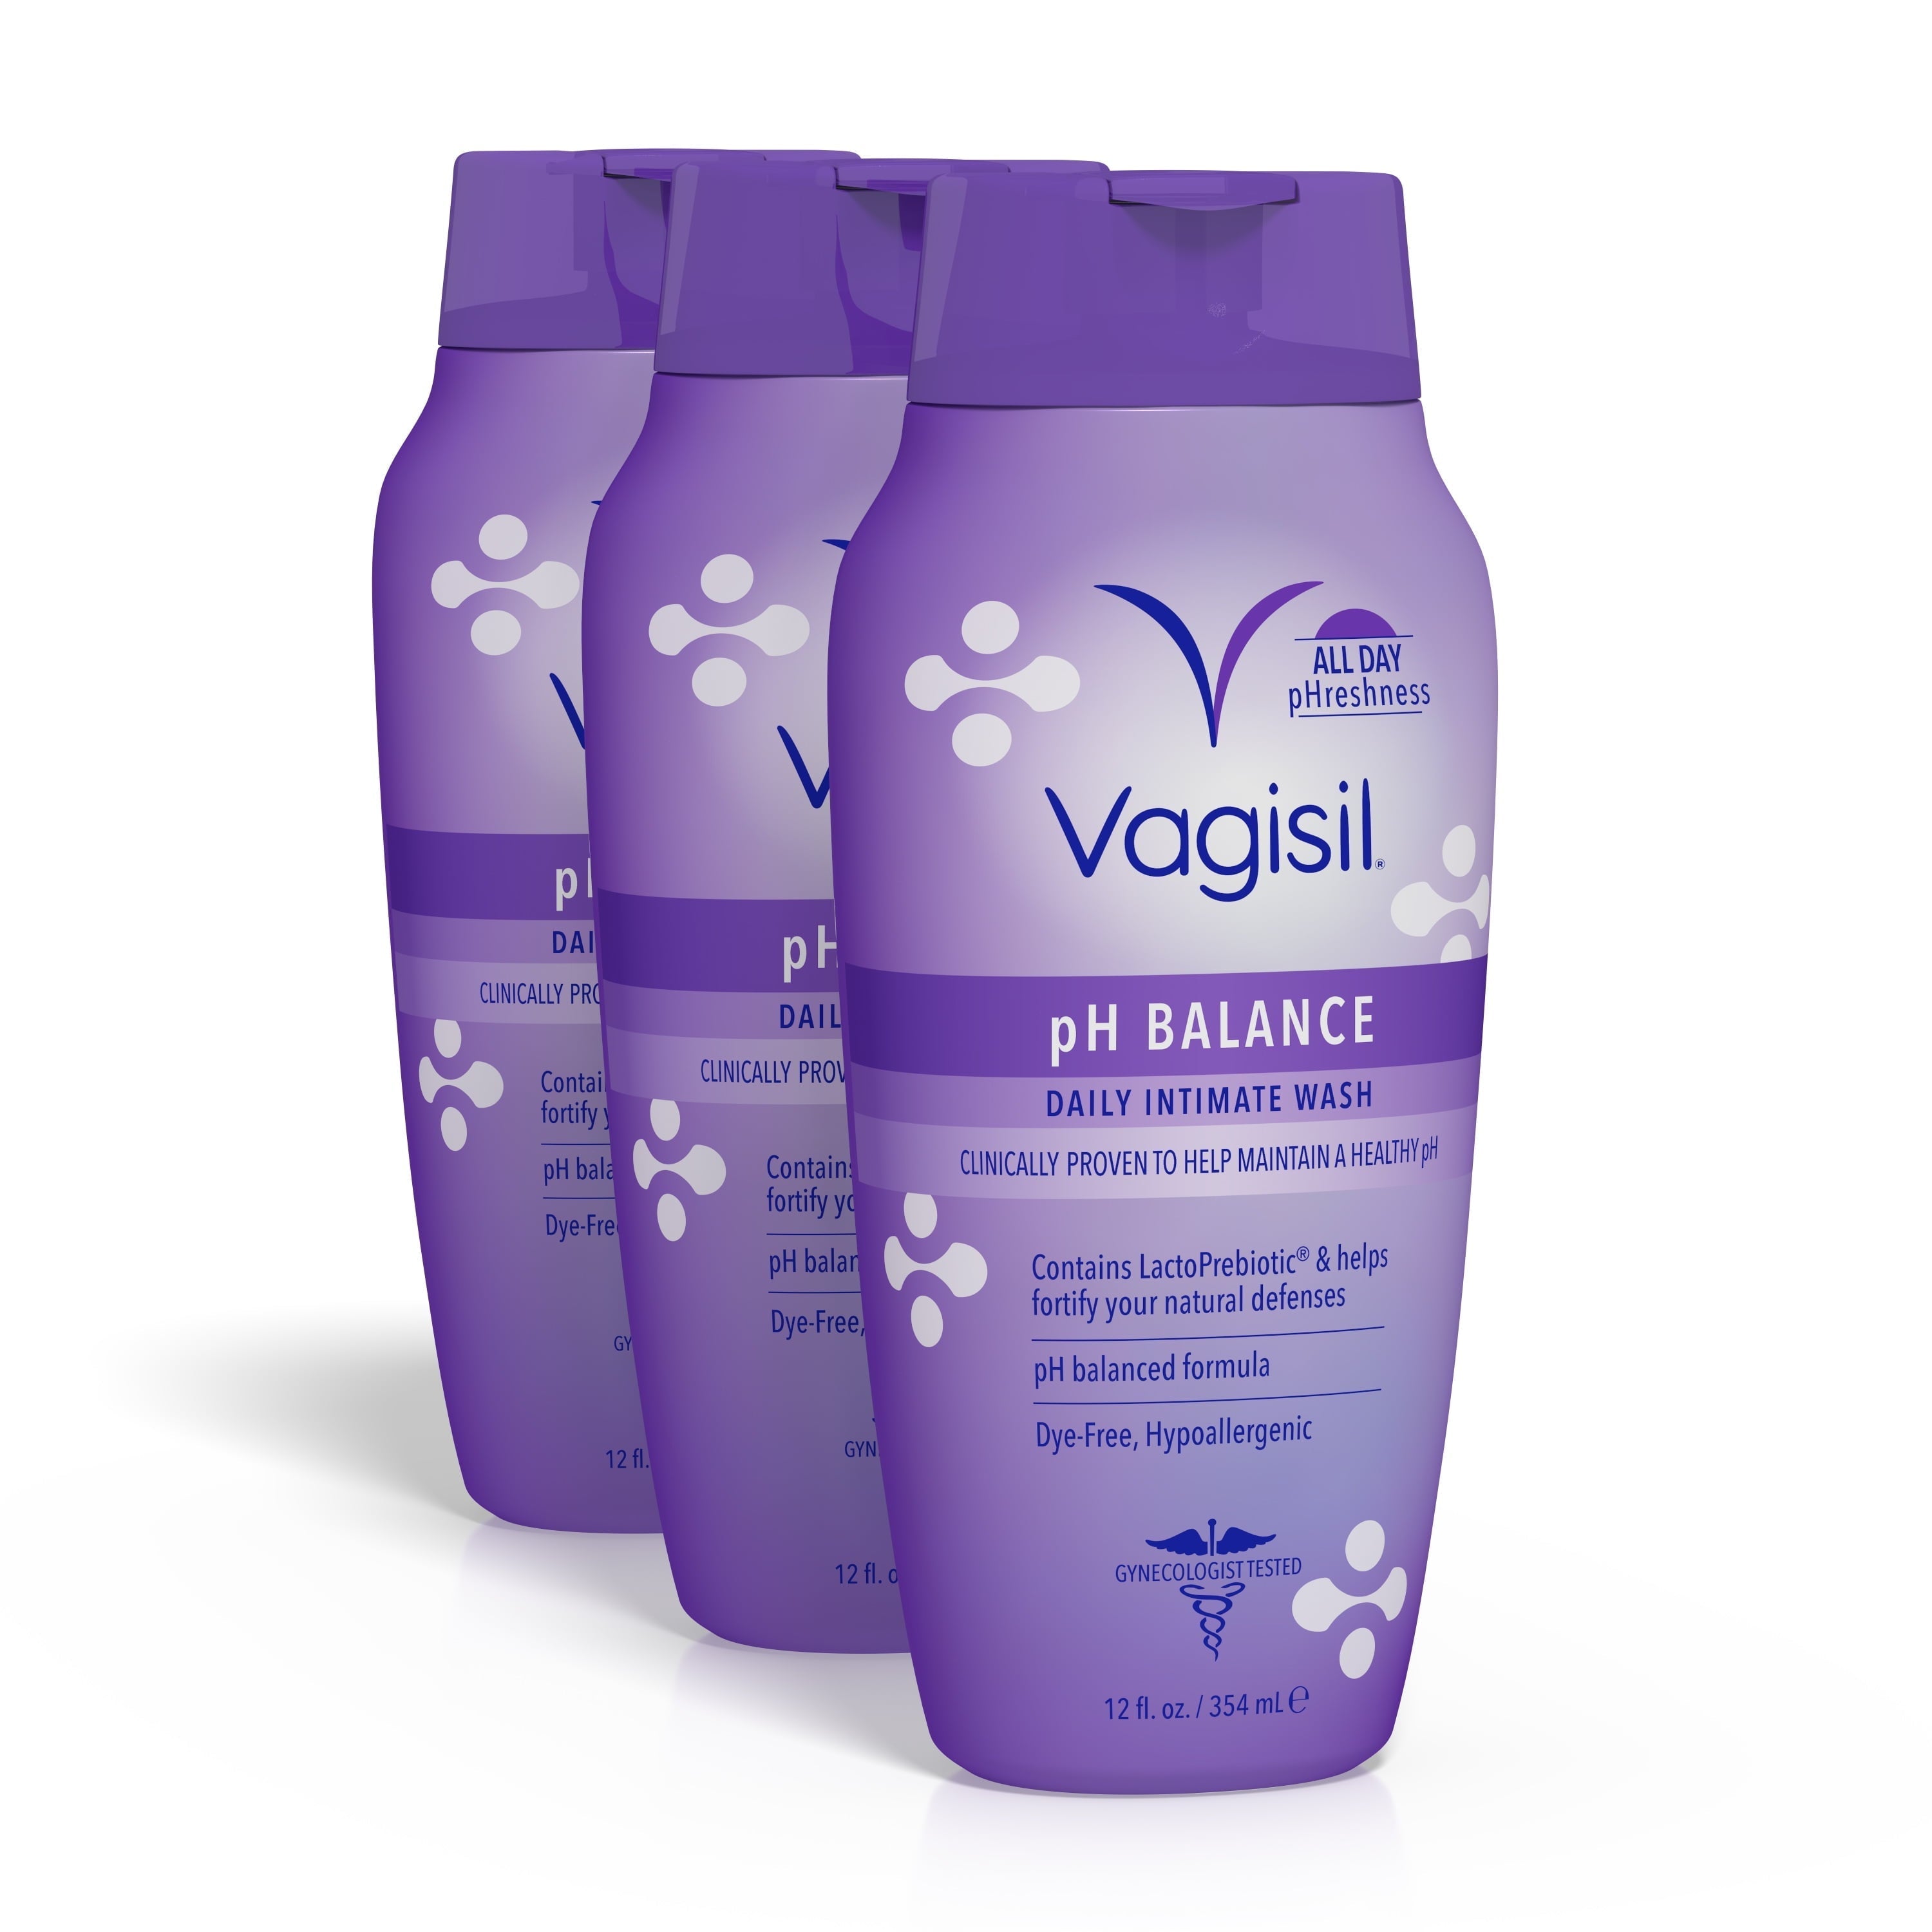 Wholesale prices with free shipping all over United States Vagisil PH Balance Daily Intimate Vaginal Feminine Wash, 12 oz, 3 Pack - Steven Deals